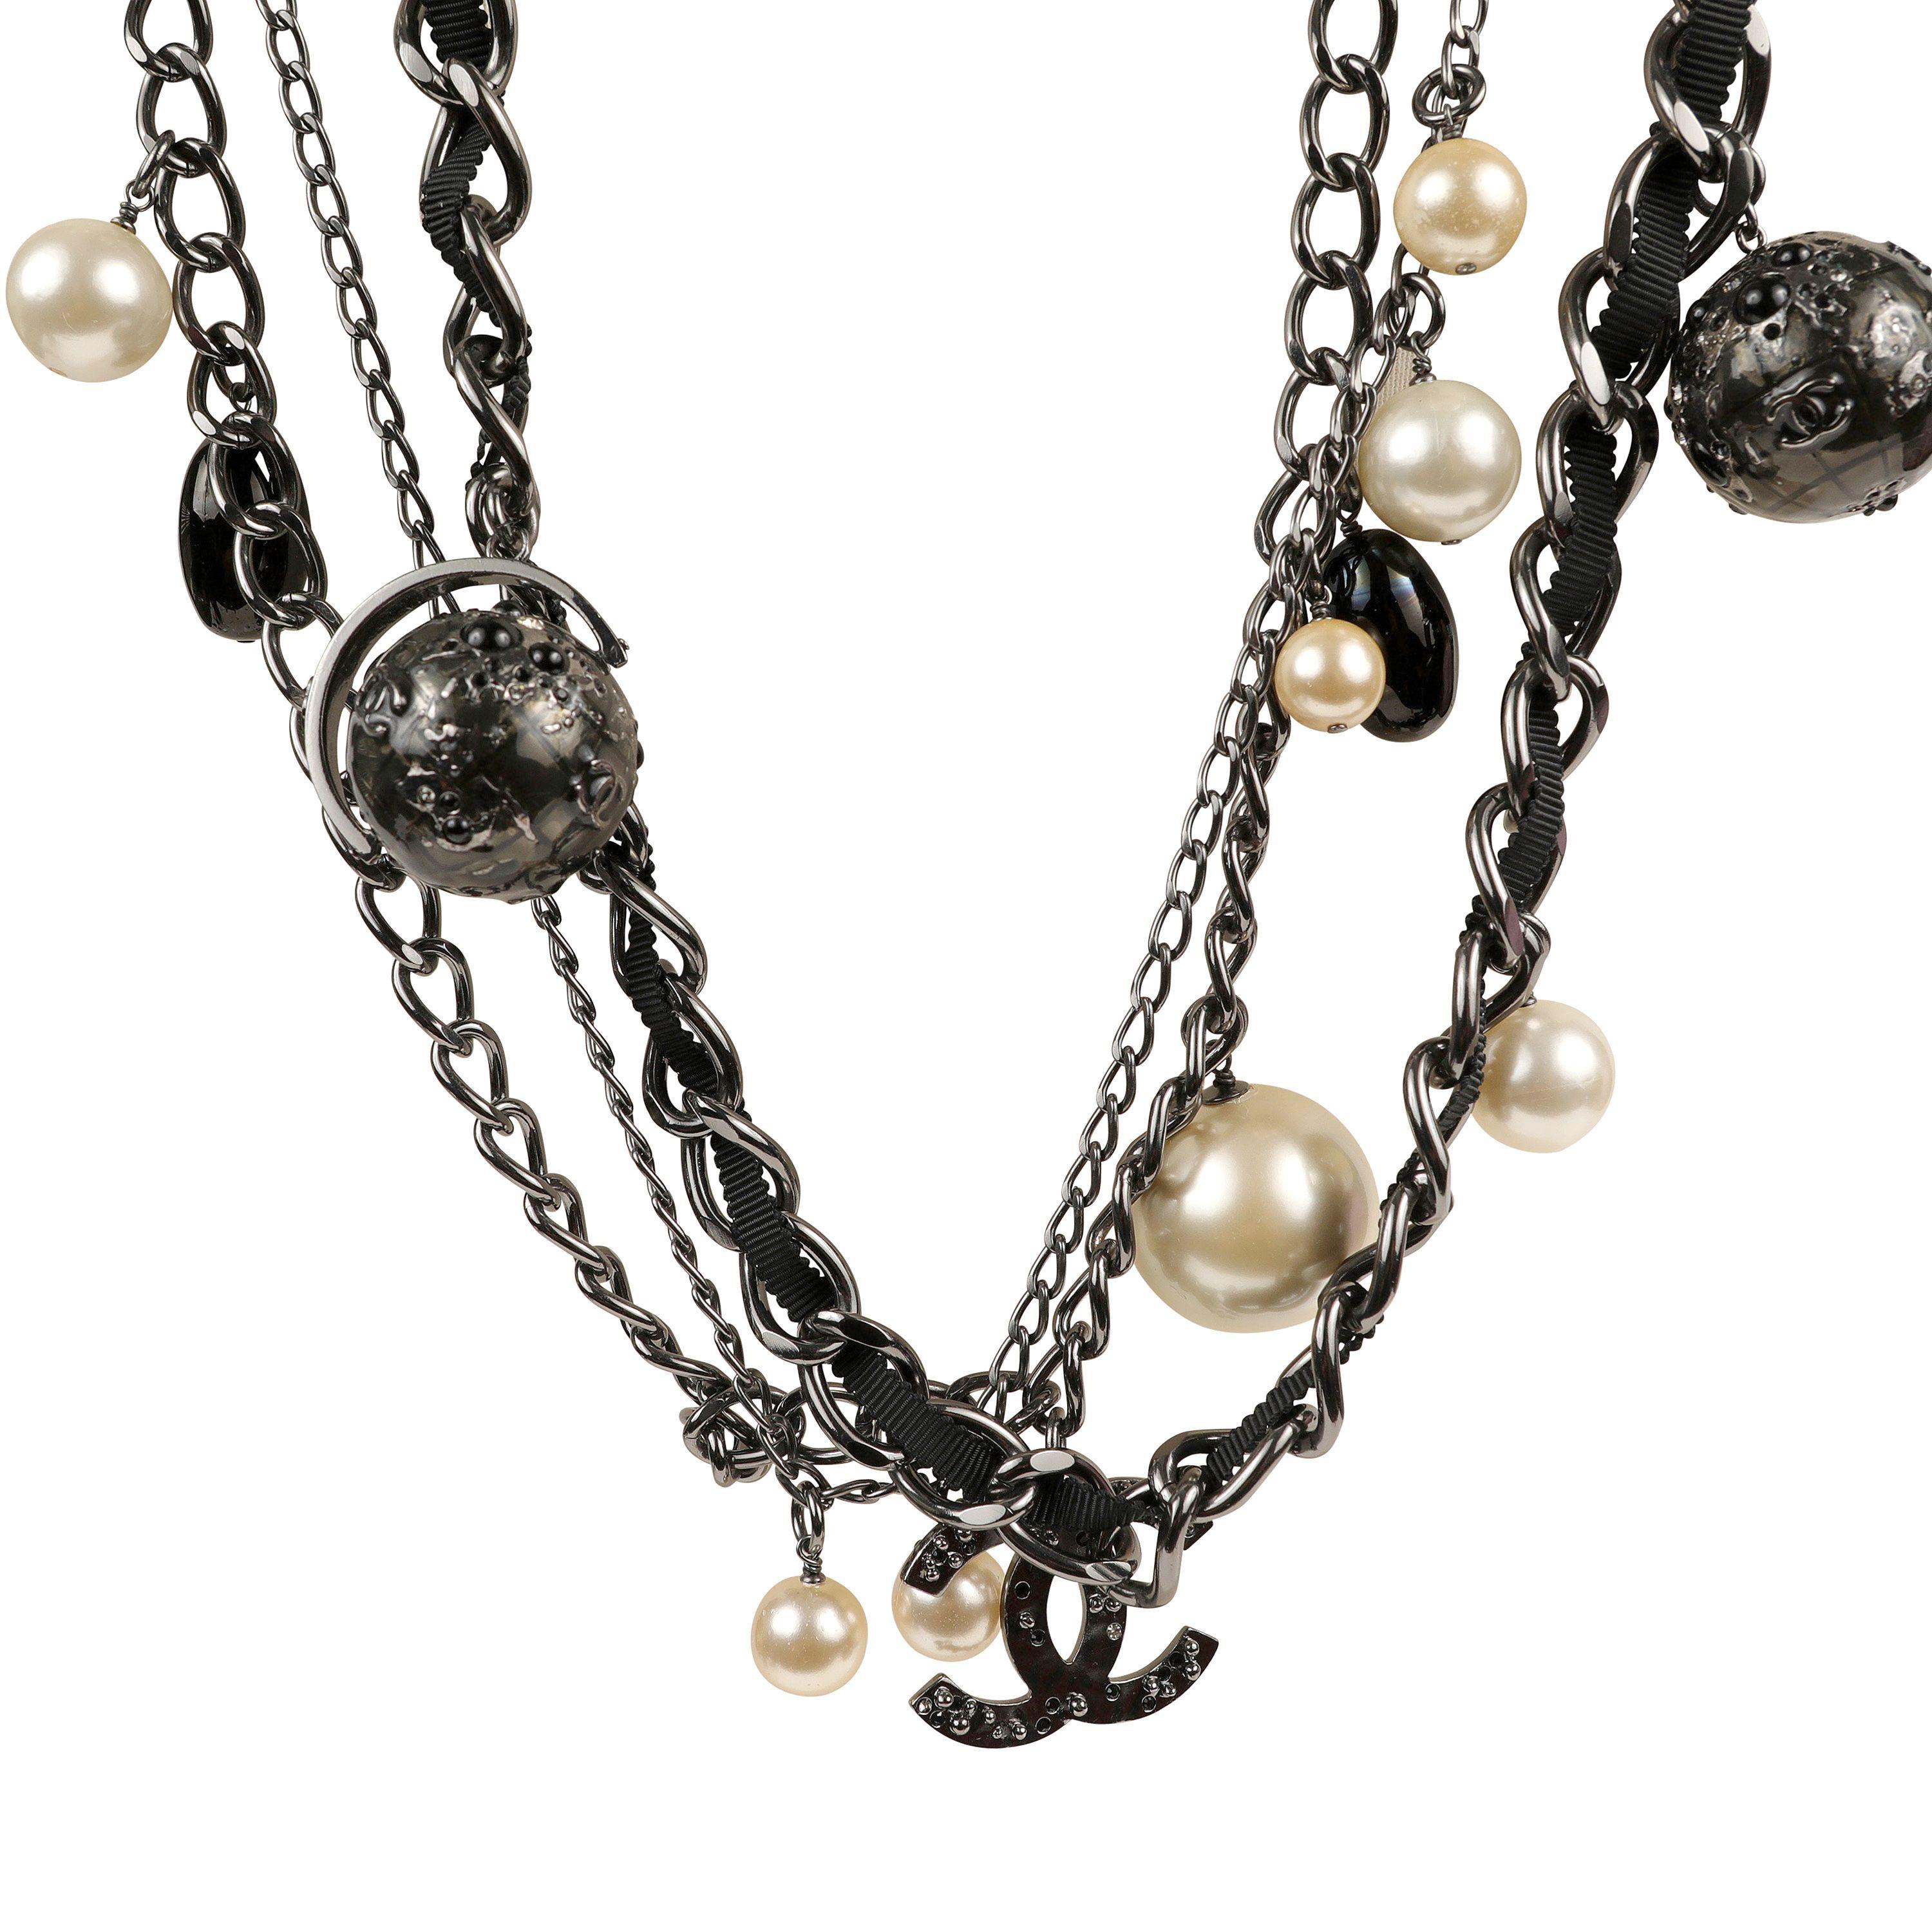 Chanel Ruthenium Globe Multi Chain Necklace with Pearls For Sale 1